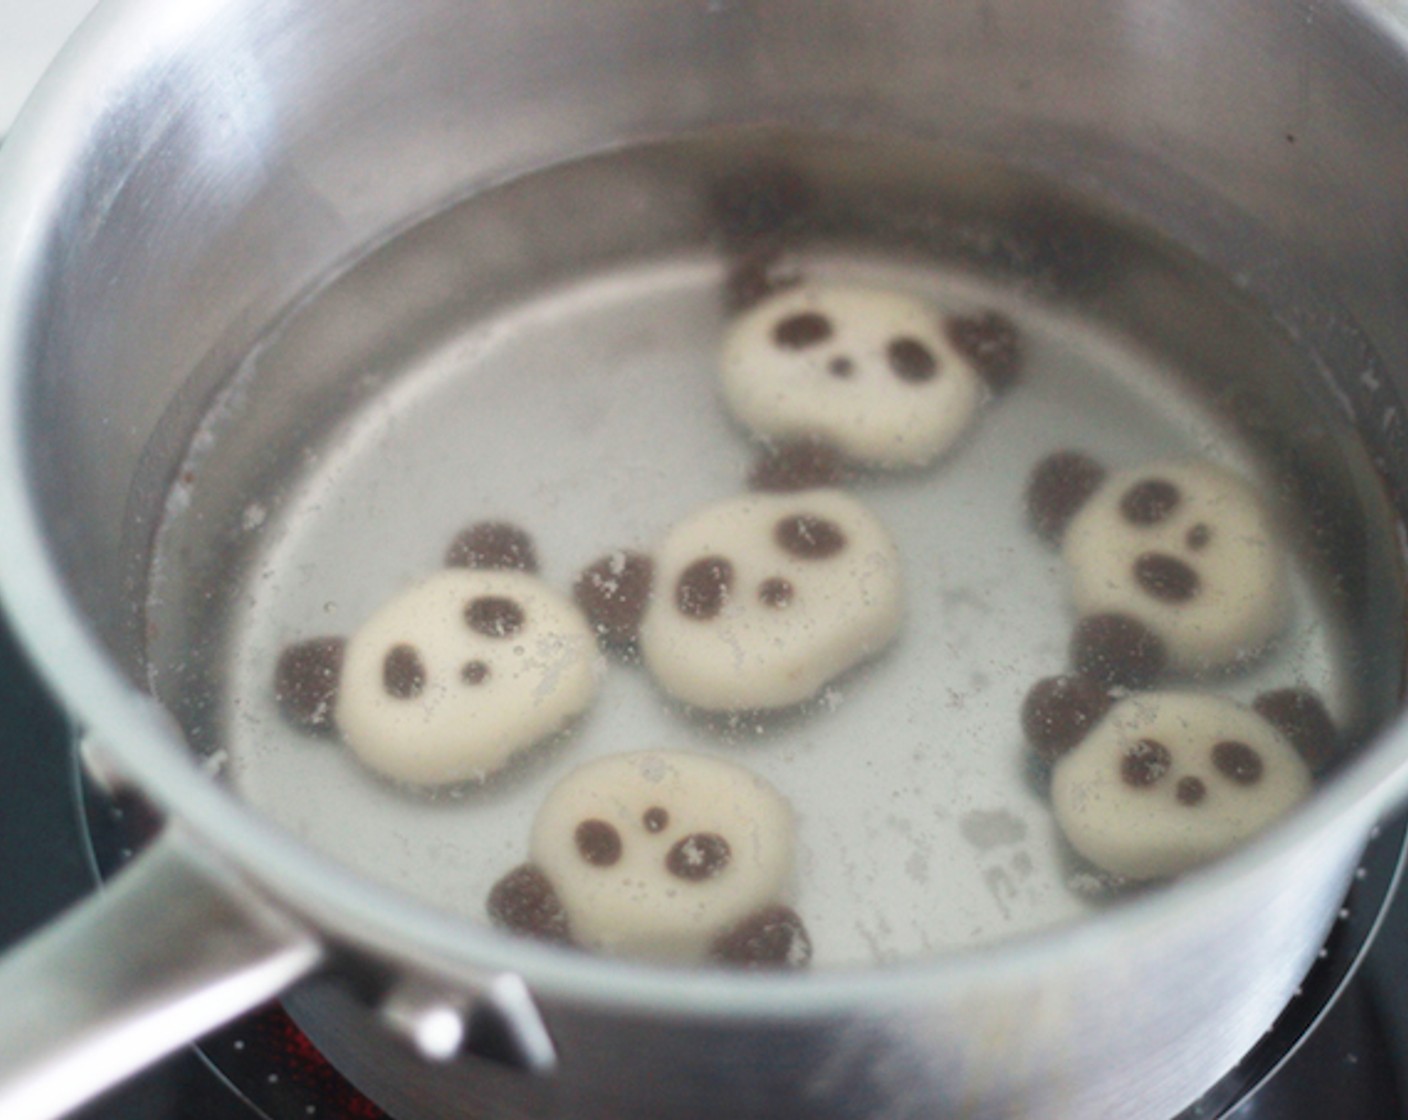 step 9 Boil the pandas! Toss the pandas gentry in a boiling water with a low heat, and cook them till they float. It should take around 5 minutes. Pick up the floating pandas. When pandas start to float, it’s time to eat!